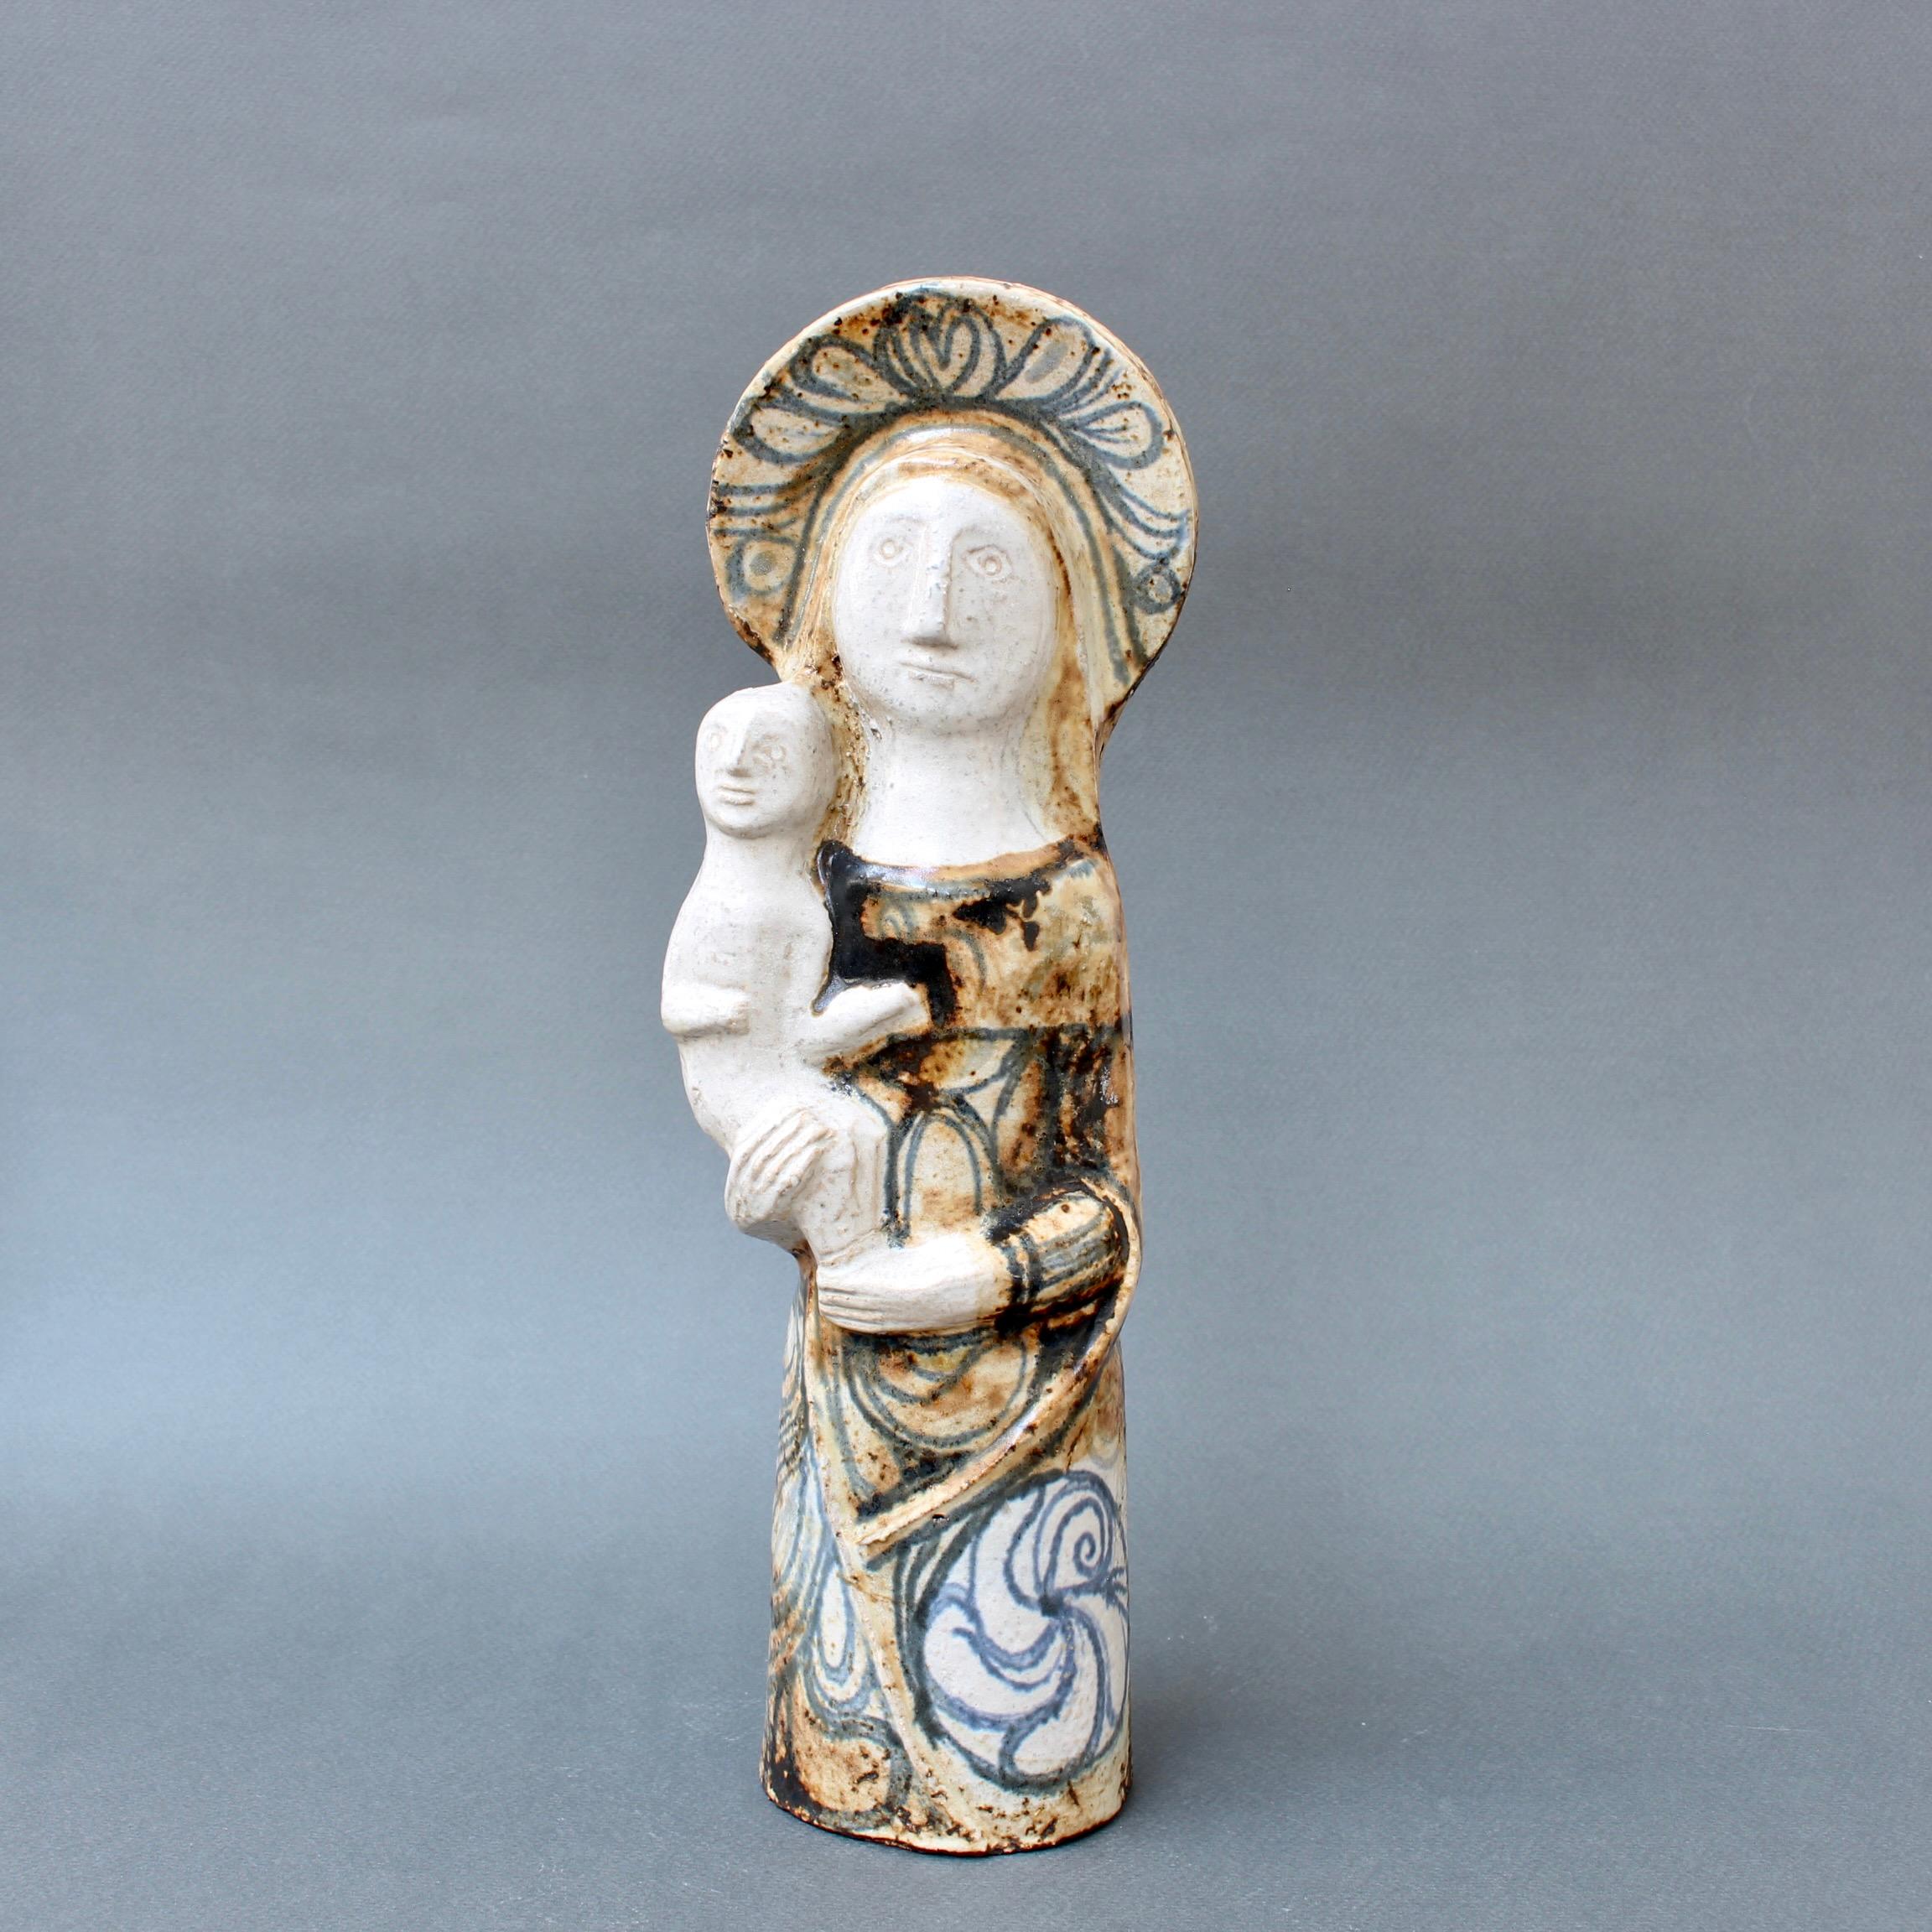 Vintage French ceramic of the Virgin with Child by Jean Derval (circa 1950s). Given Jean Derval's religious convictions, it's hard not to think of this exquisite ceramic sculpture as an explicit spiritual statement of hope, determination and faith.